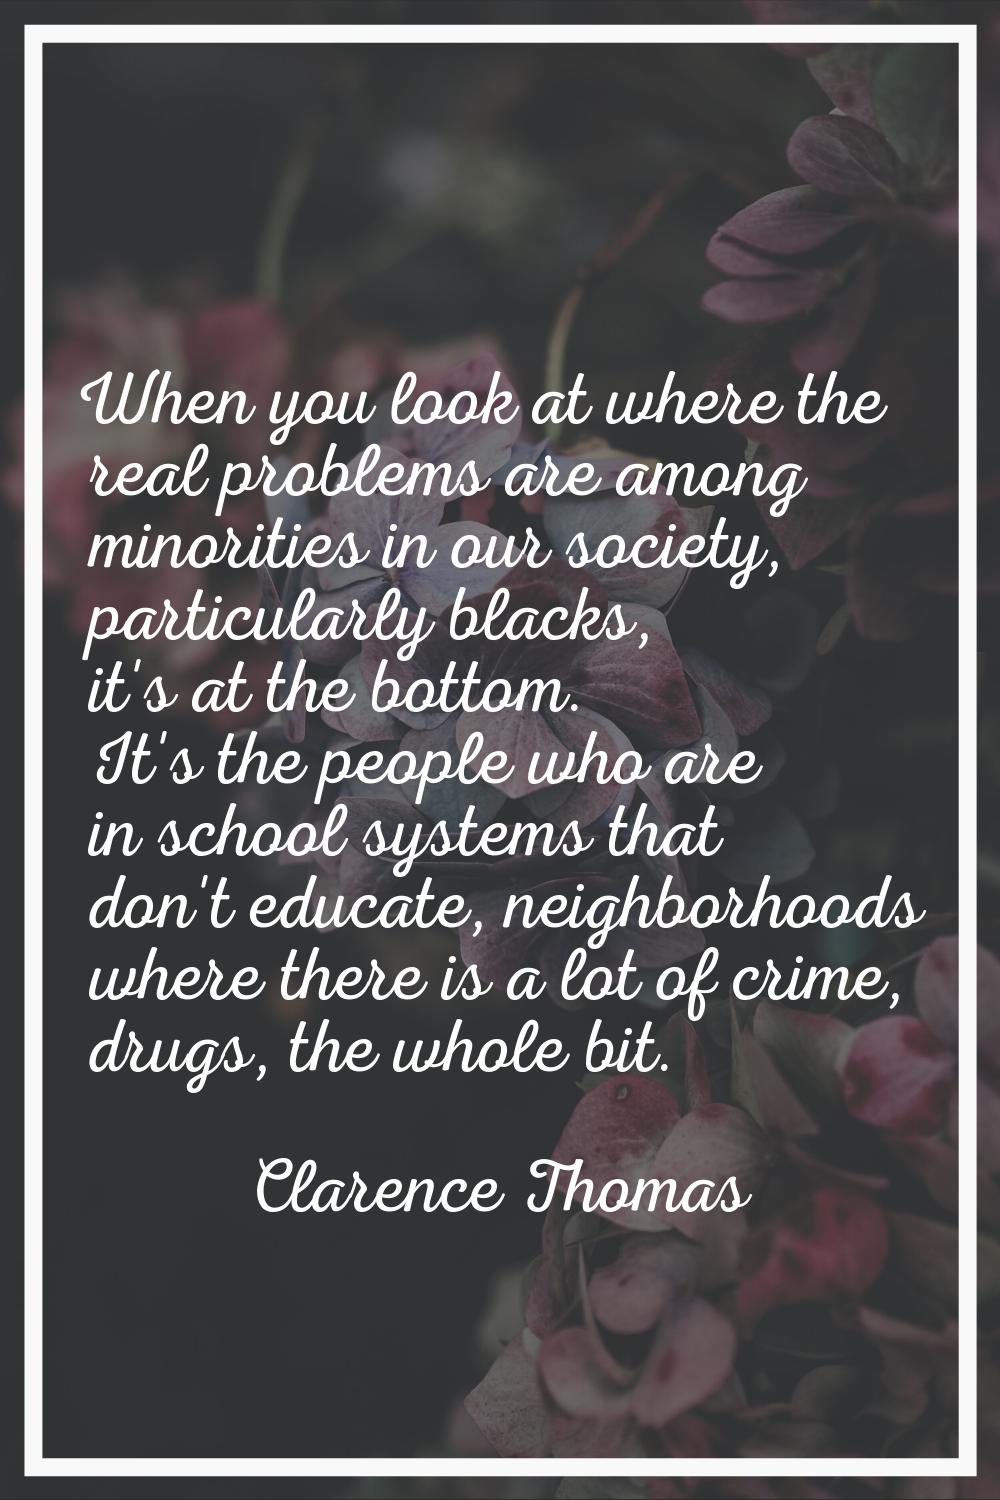 When you look at where the real problems are among minorities in our society, particularly blacks, 